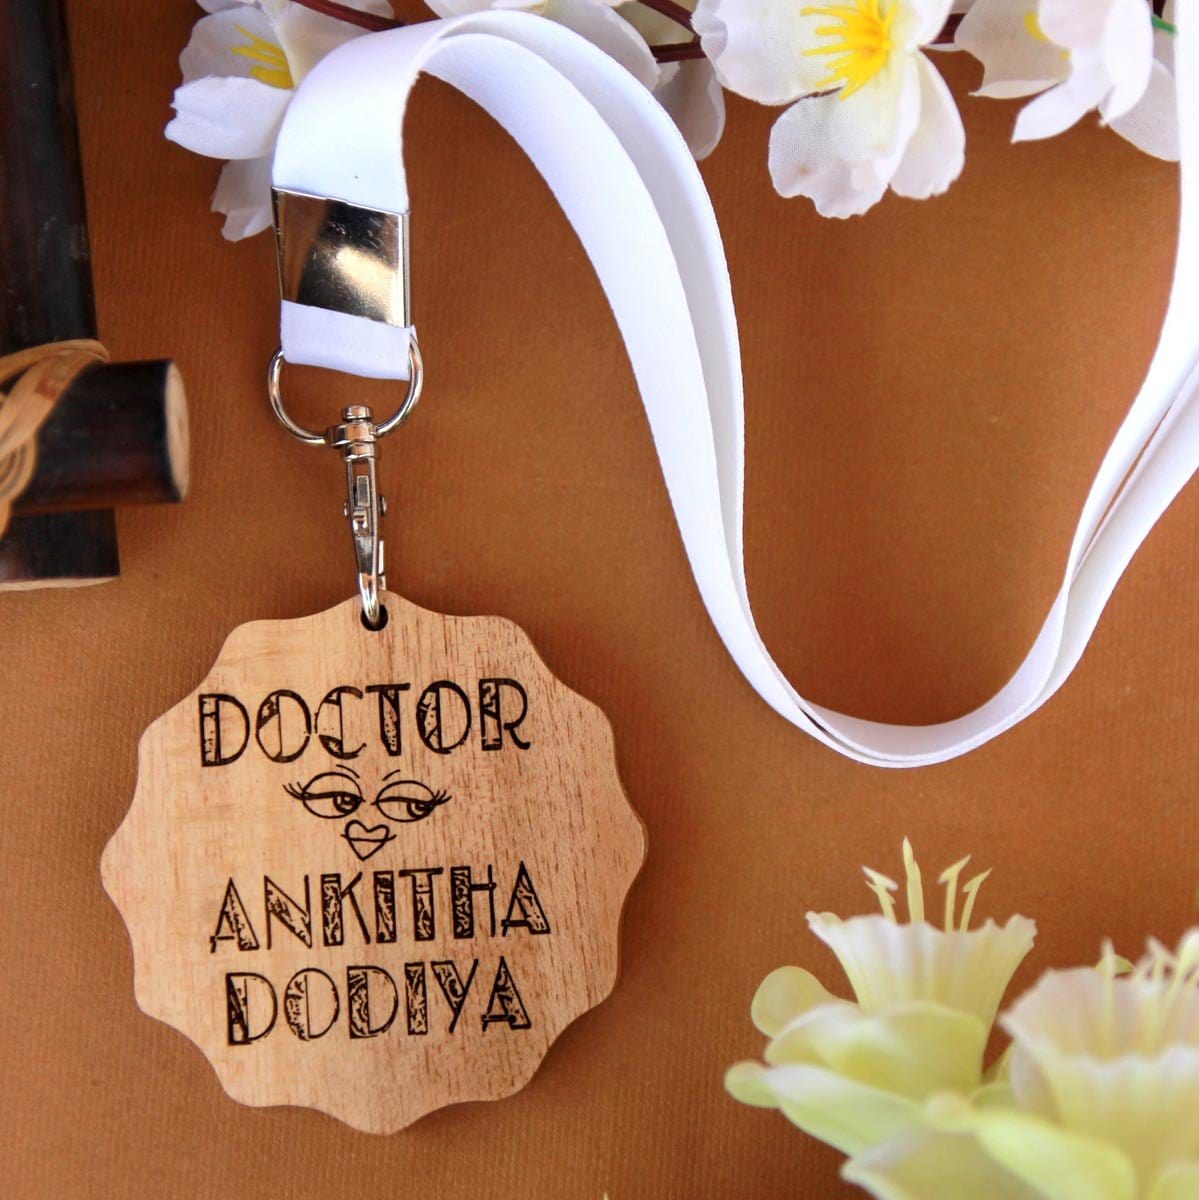 Personalized Wooden Medals For Doctors. Looking for Gift Ideas For Doctors? These Medal Awards Are The Best Gifts For Doctors. These Medals Can Be Given As Thank You Gifts For Doctors.